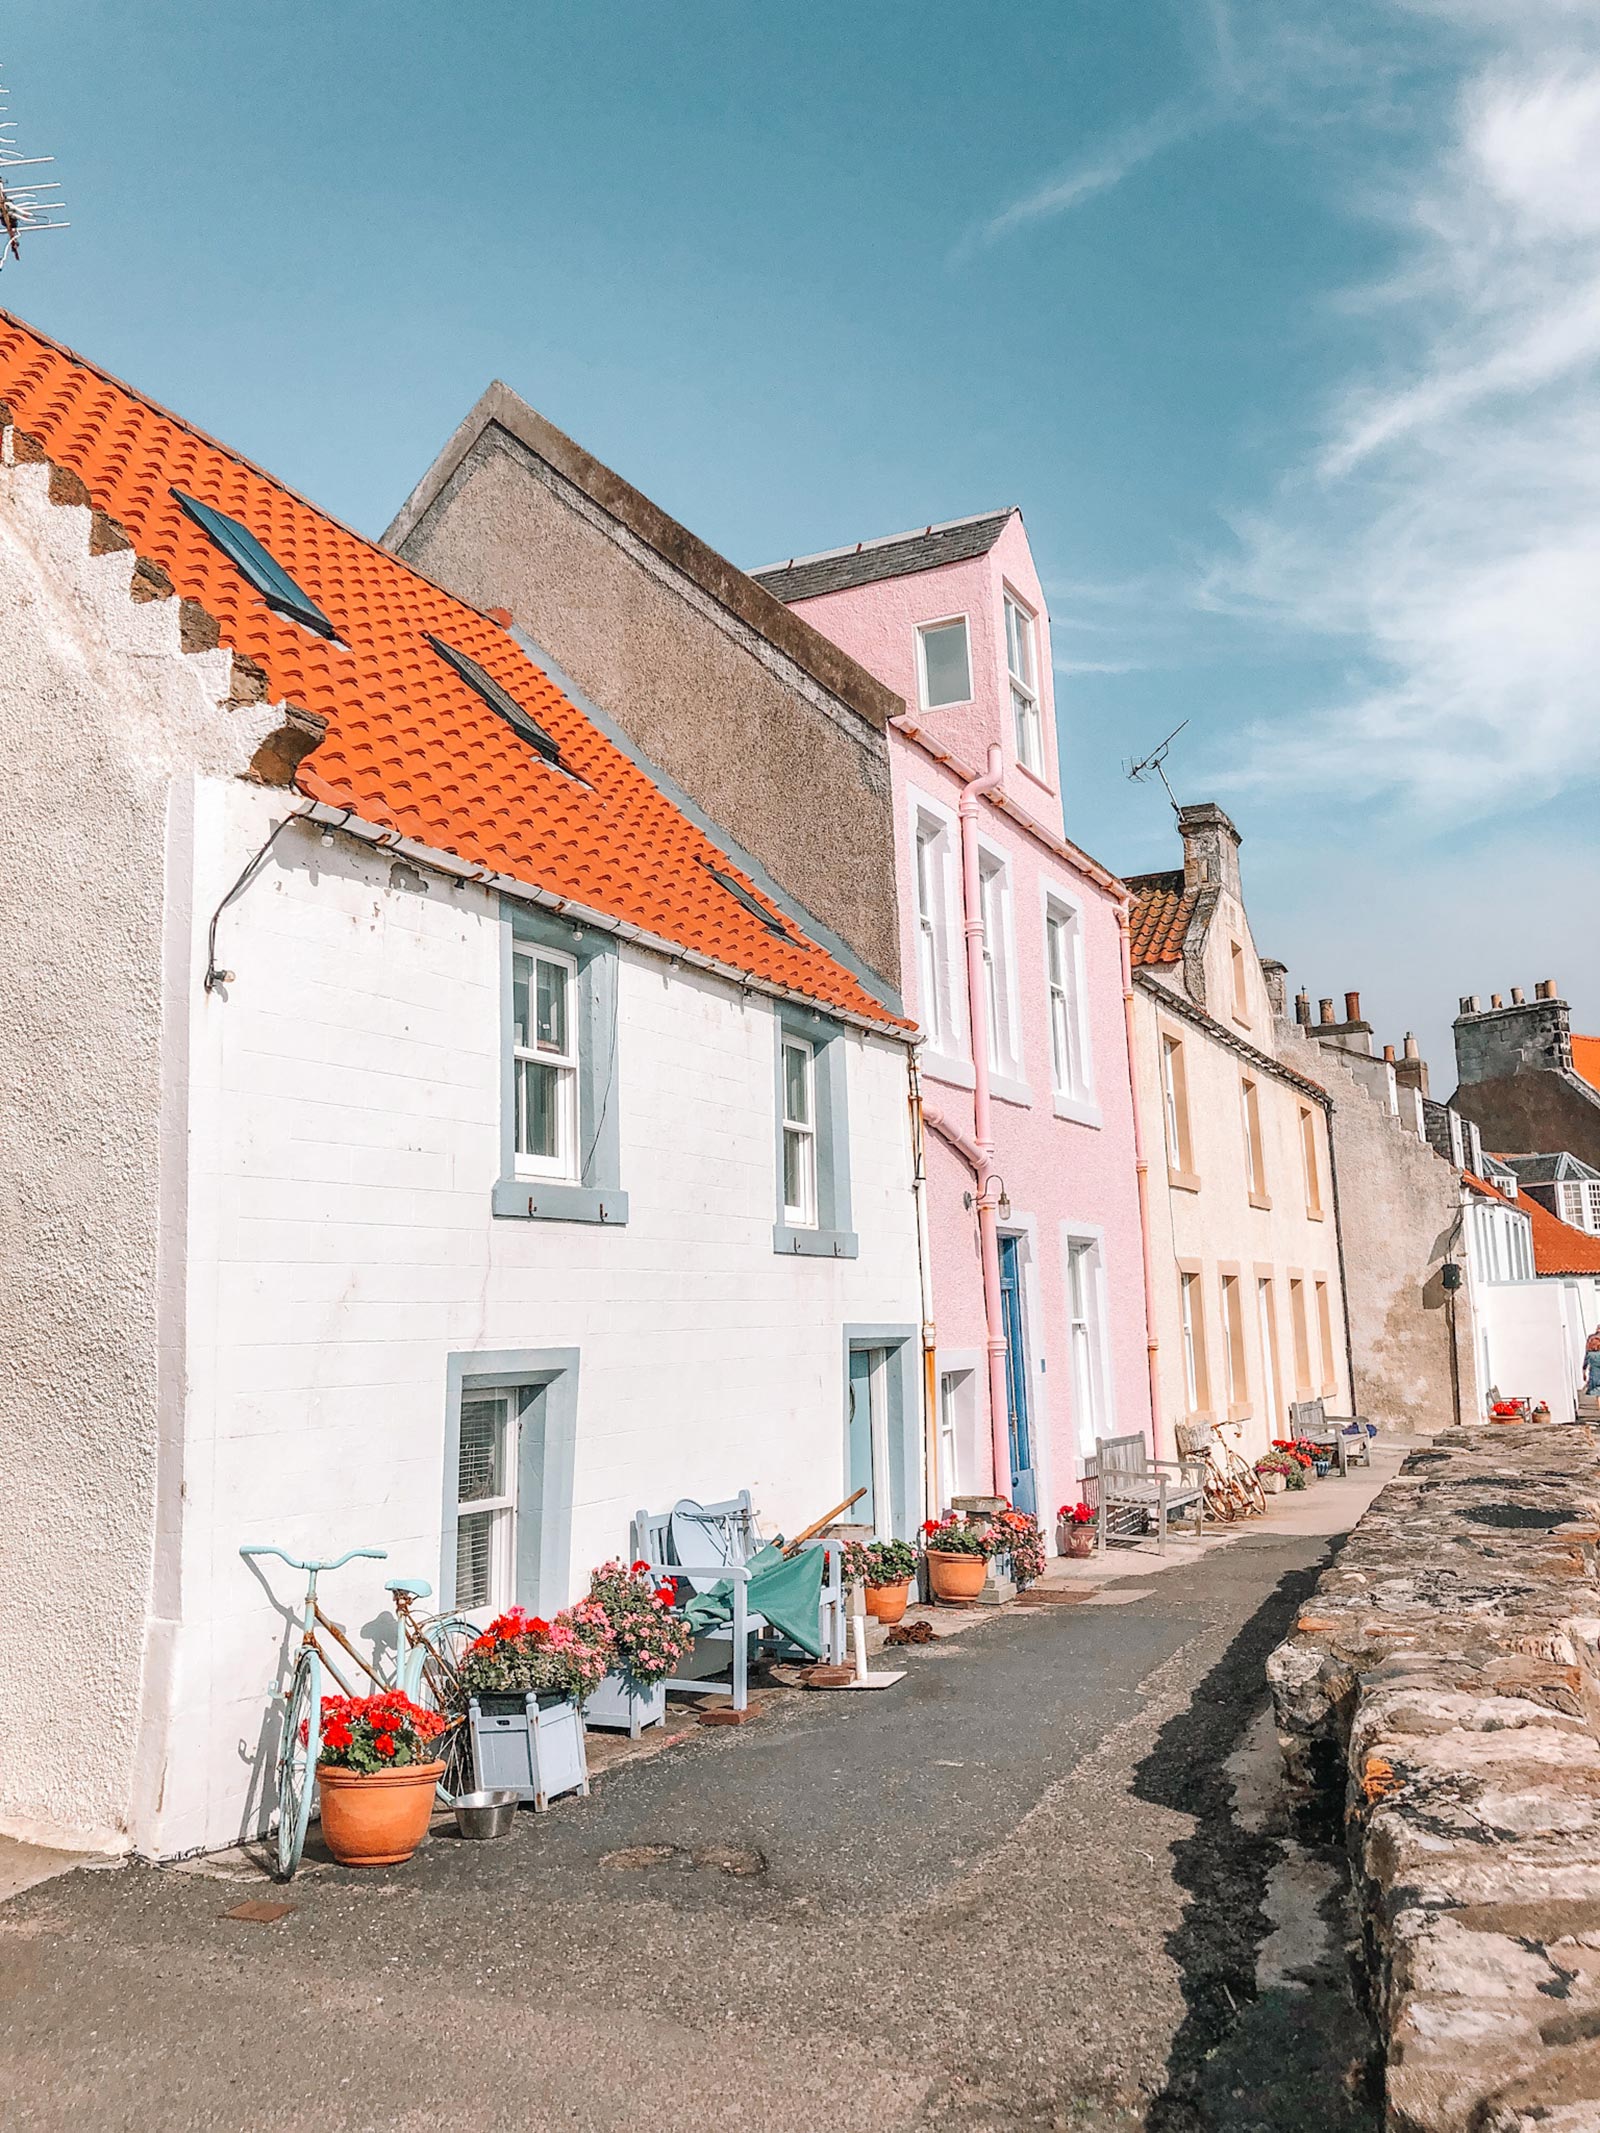 Colourful houses in Pittenweem, Fife